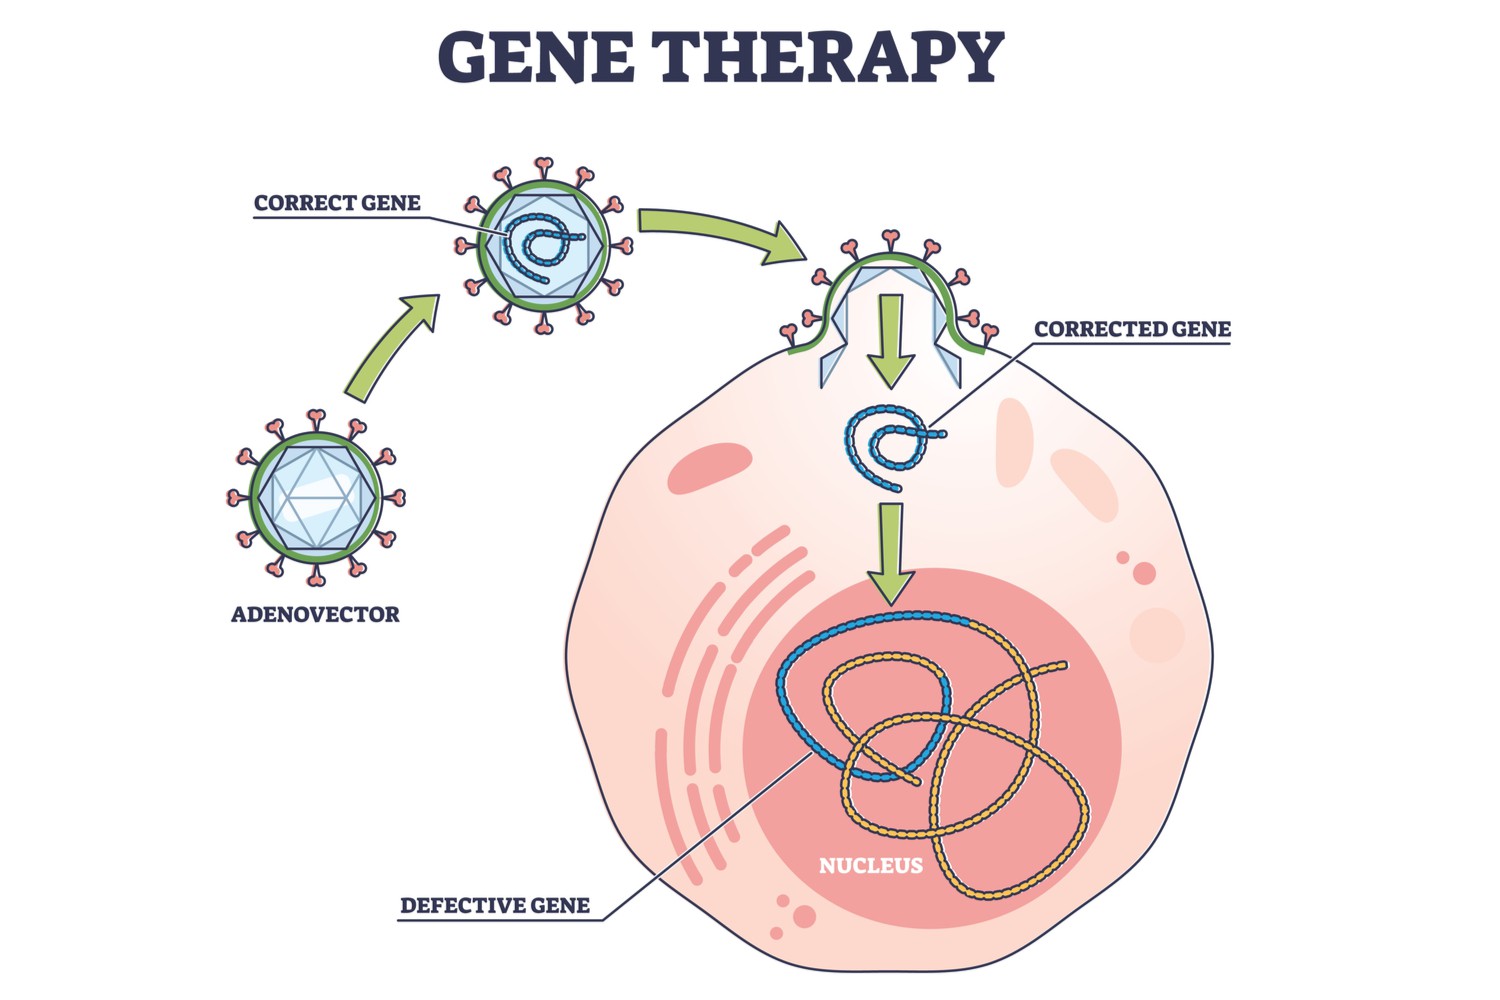 Why is Gene Therapy Done